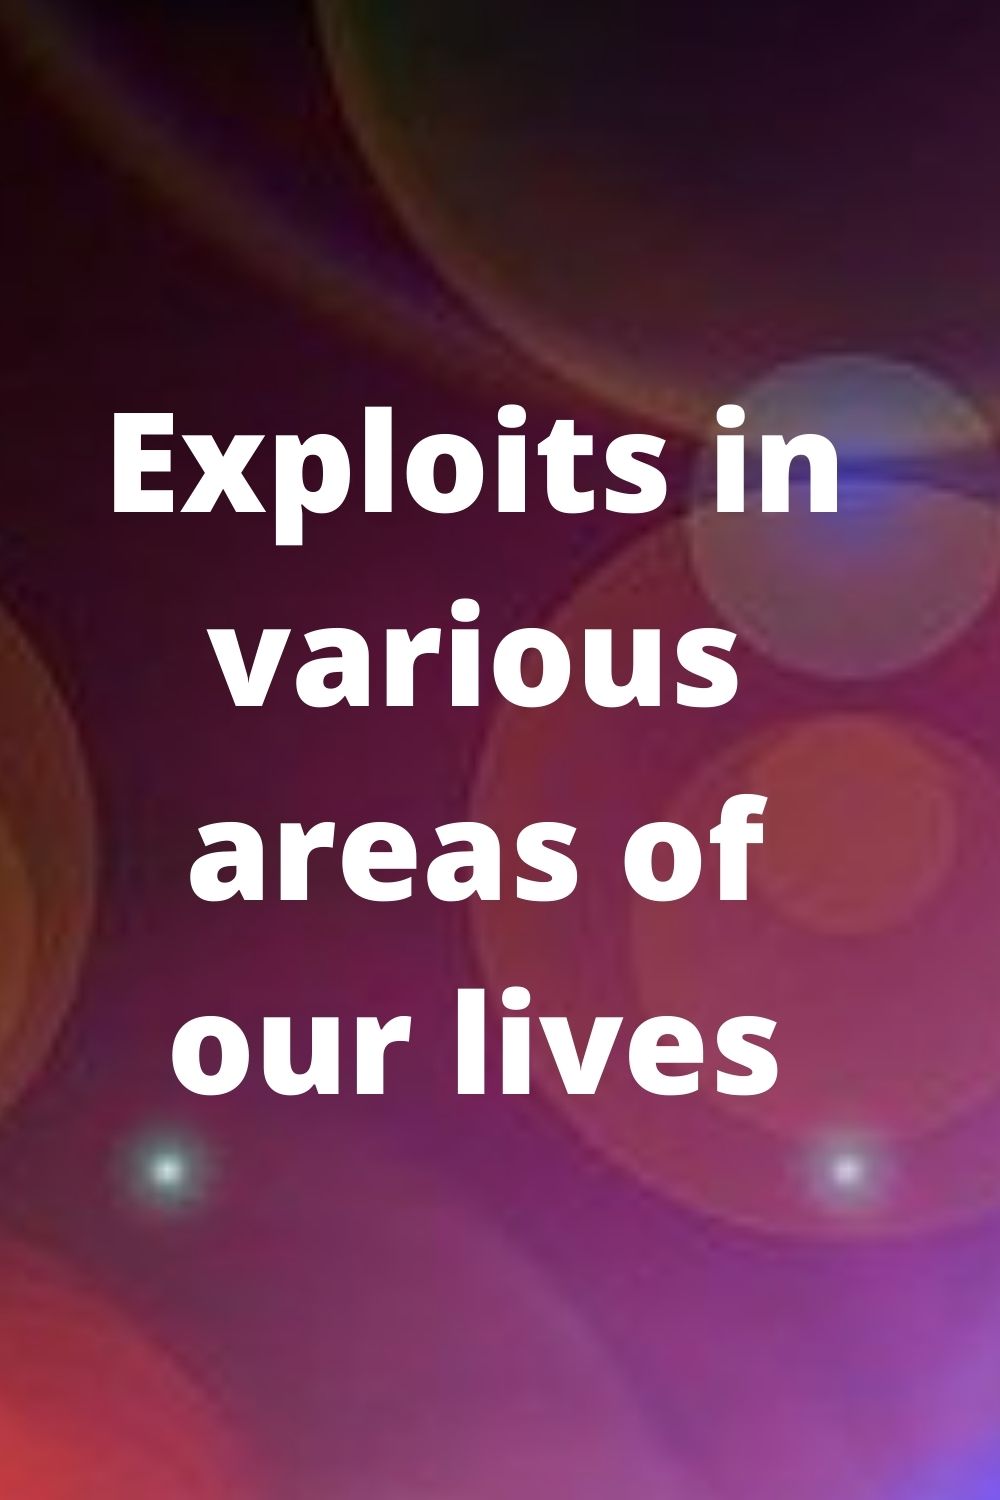 Exploits in various areas of our lives